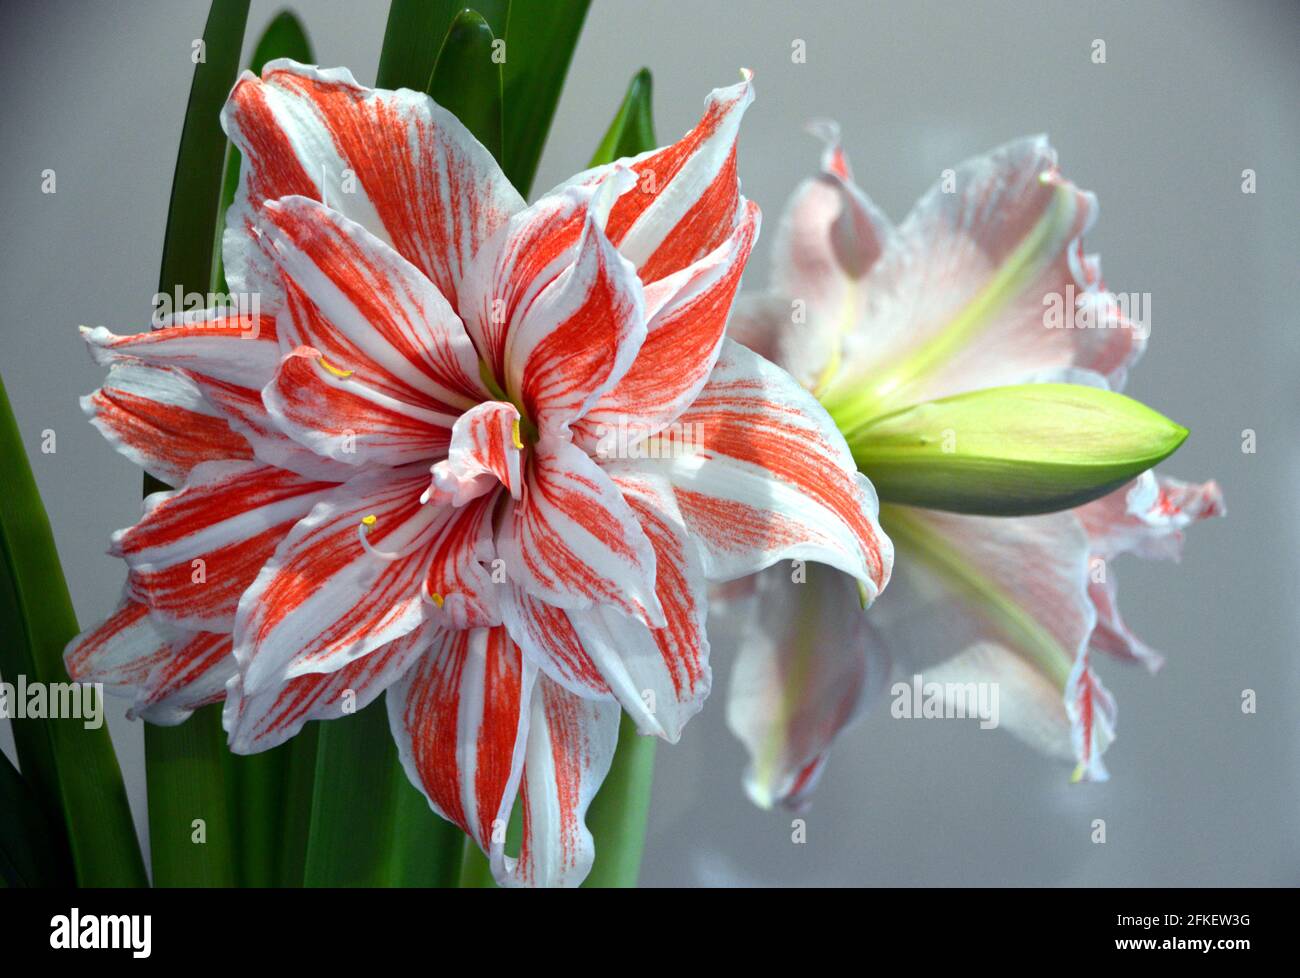 Pink and White Striped Double Flower Hippeastrum 'Dancing Queen' (Amaryllis) Houseplant in Vase, Stock Photo